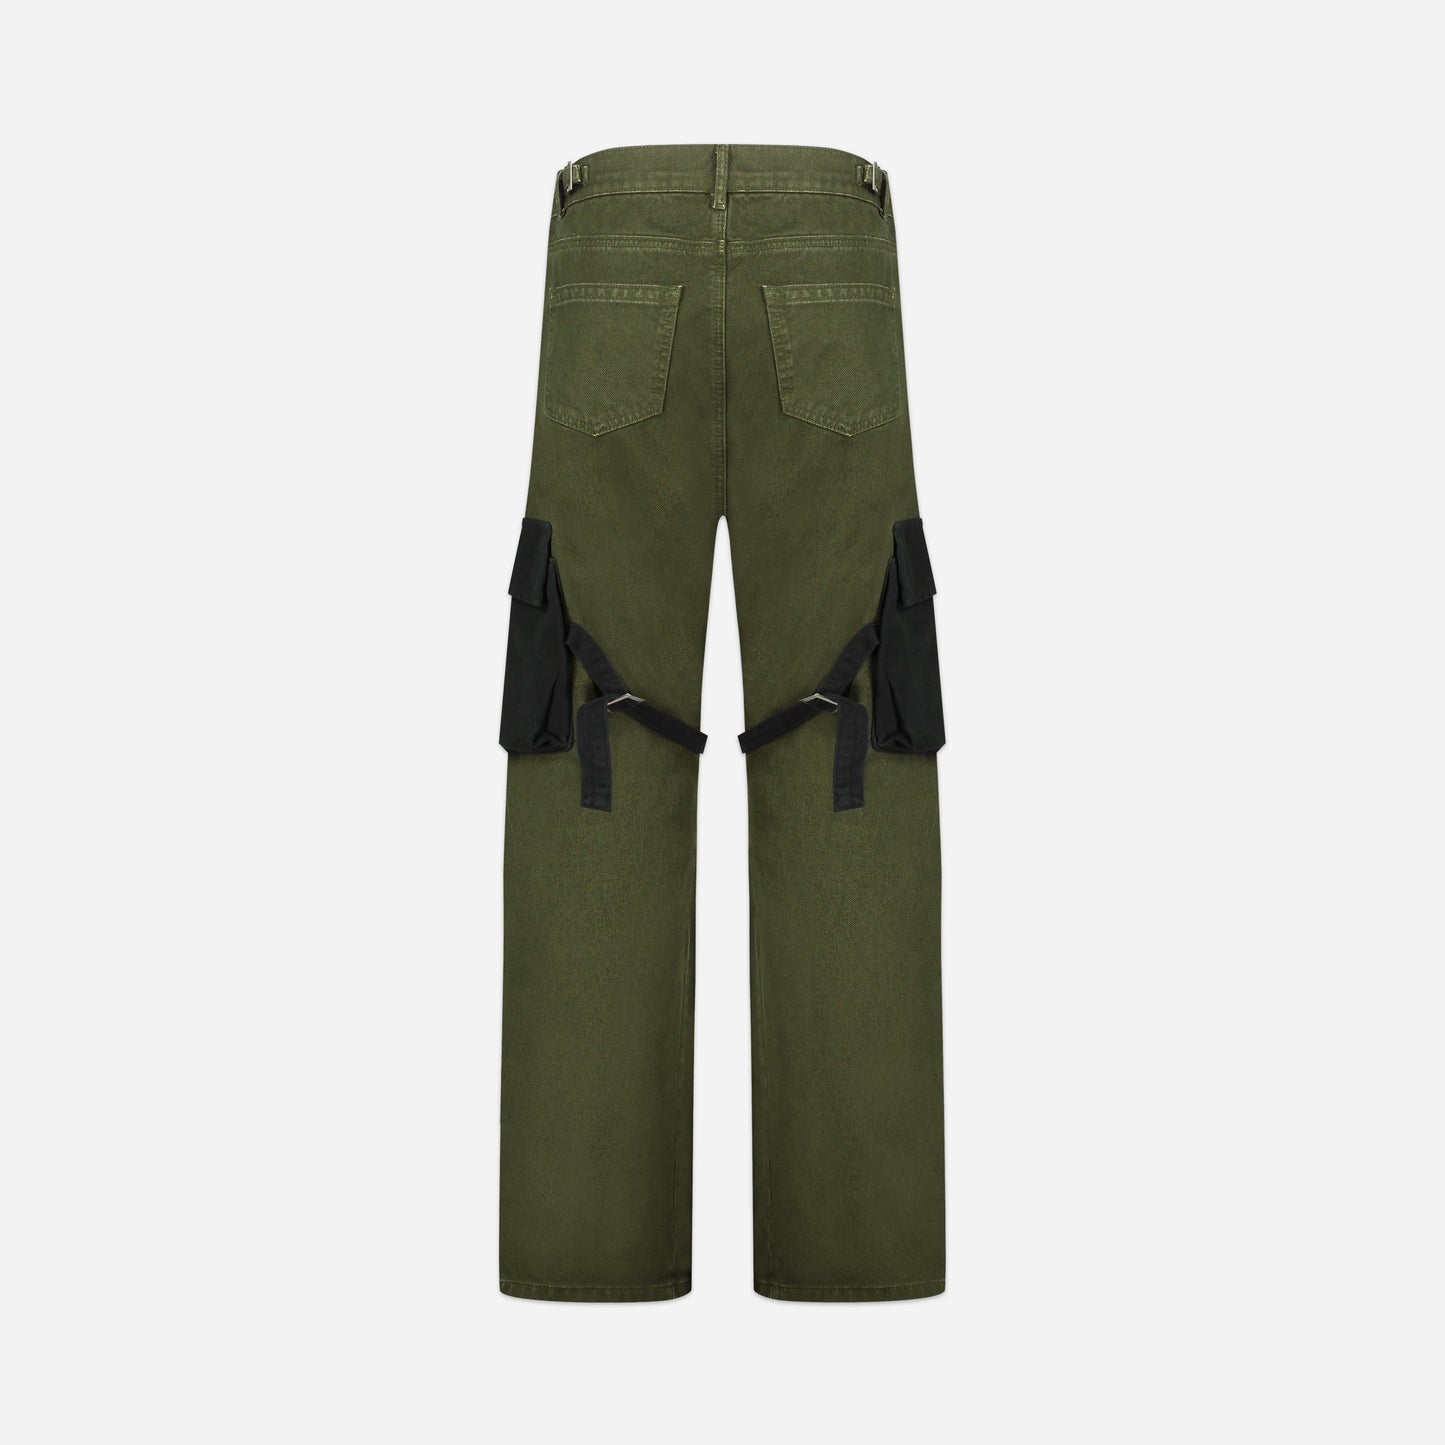 Strap Contrast Cargo Pants in Army Green with Black Pockets